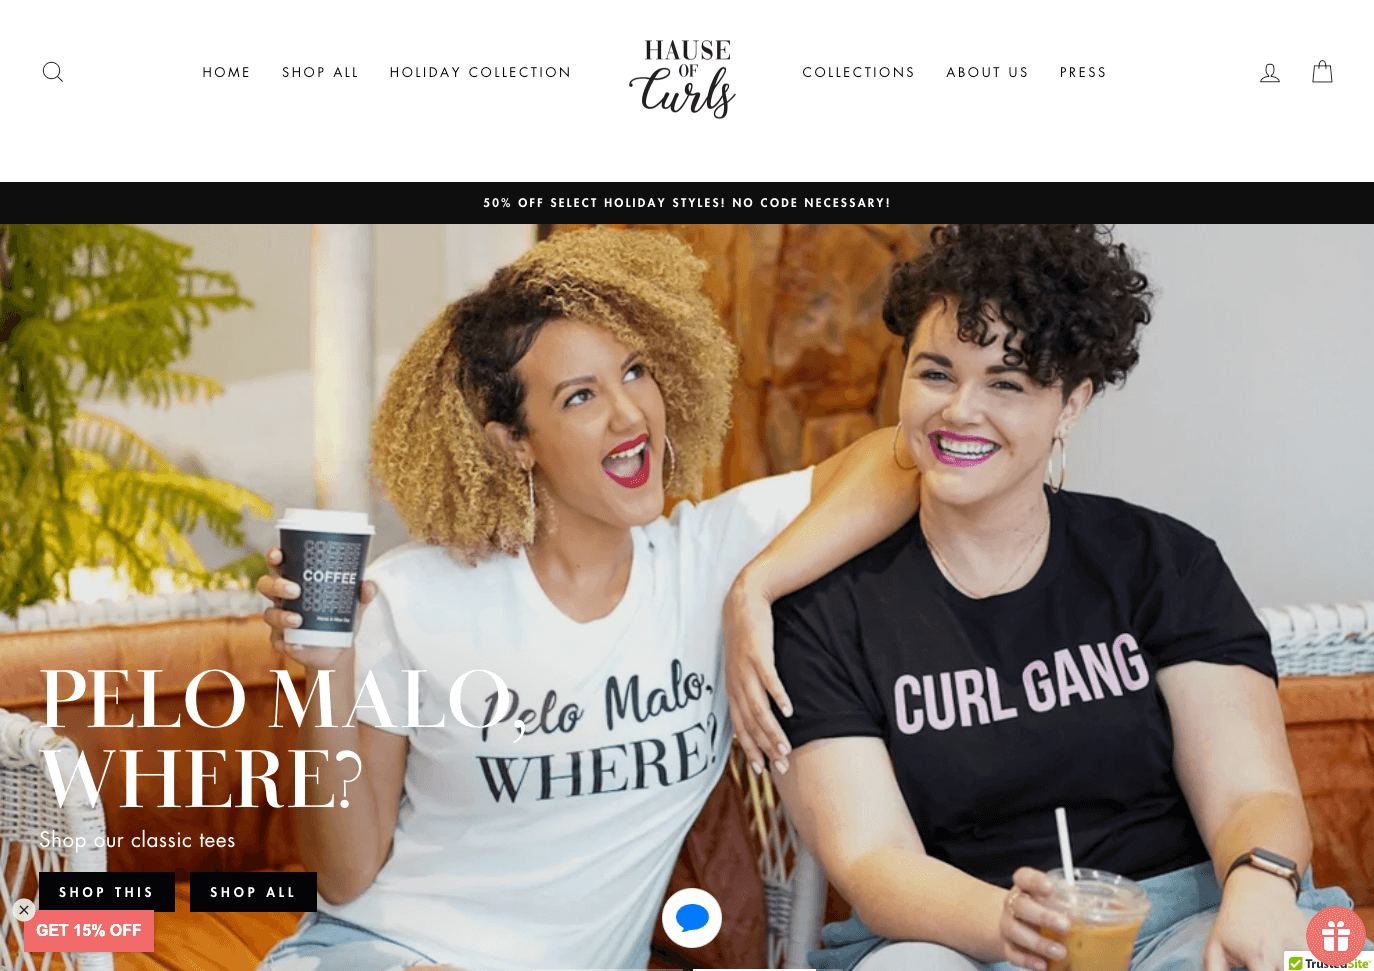 Support Black-owned businesses–A screenshot from Hause of Curls’ homepage showing two women of color smiling and wearing the brand’s shirts. One shirt is white and says, ‘Pelo Malo, Where?’, which means ‘Bad Hair, Where?’ in black letters. The other woman is wearing a black t-shirt that says ‘Curl Gang’ in pink block letters.  